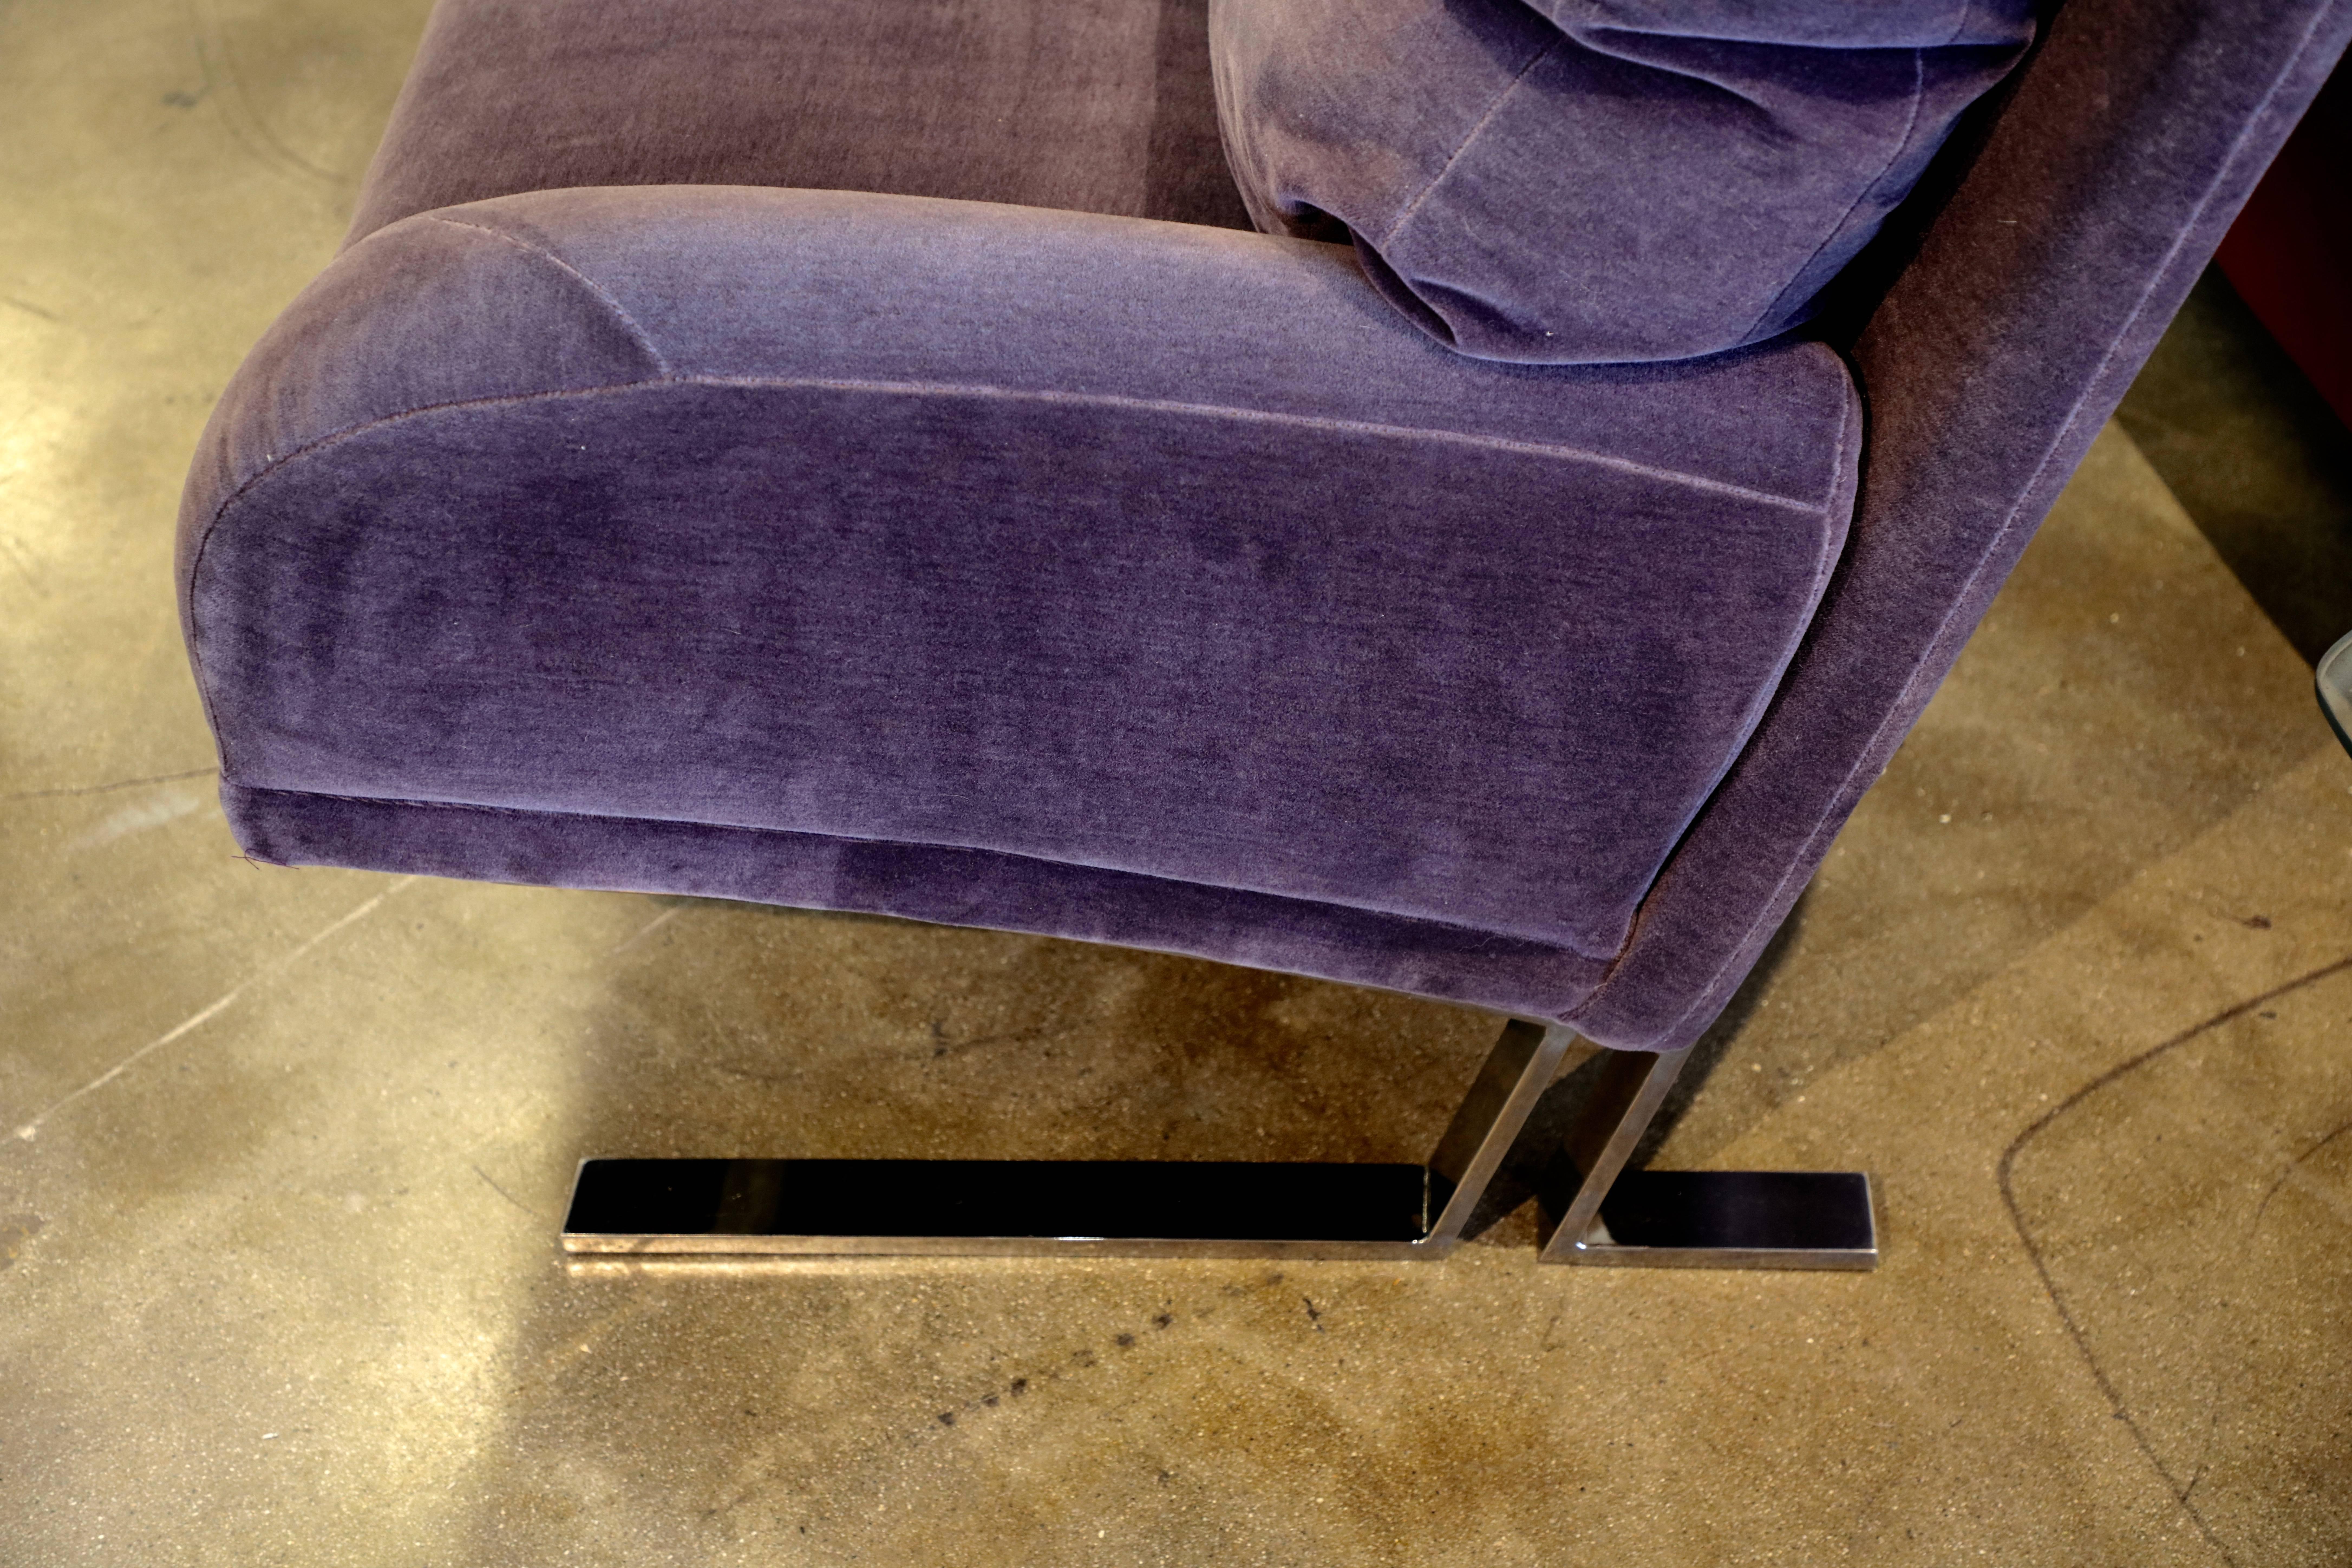 A vintage Directional chair in steel and purple wool mohair. This lounge chair retains the original Directional label. The underneath webbing or black duvet has been replaced otherwise the chair is original. This design has been alternatively been